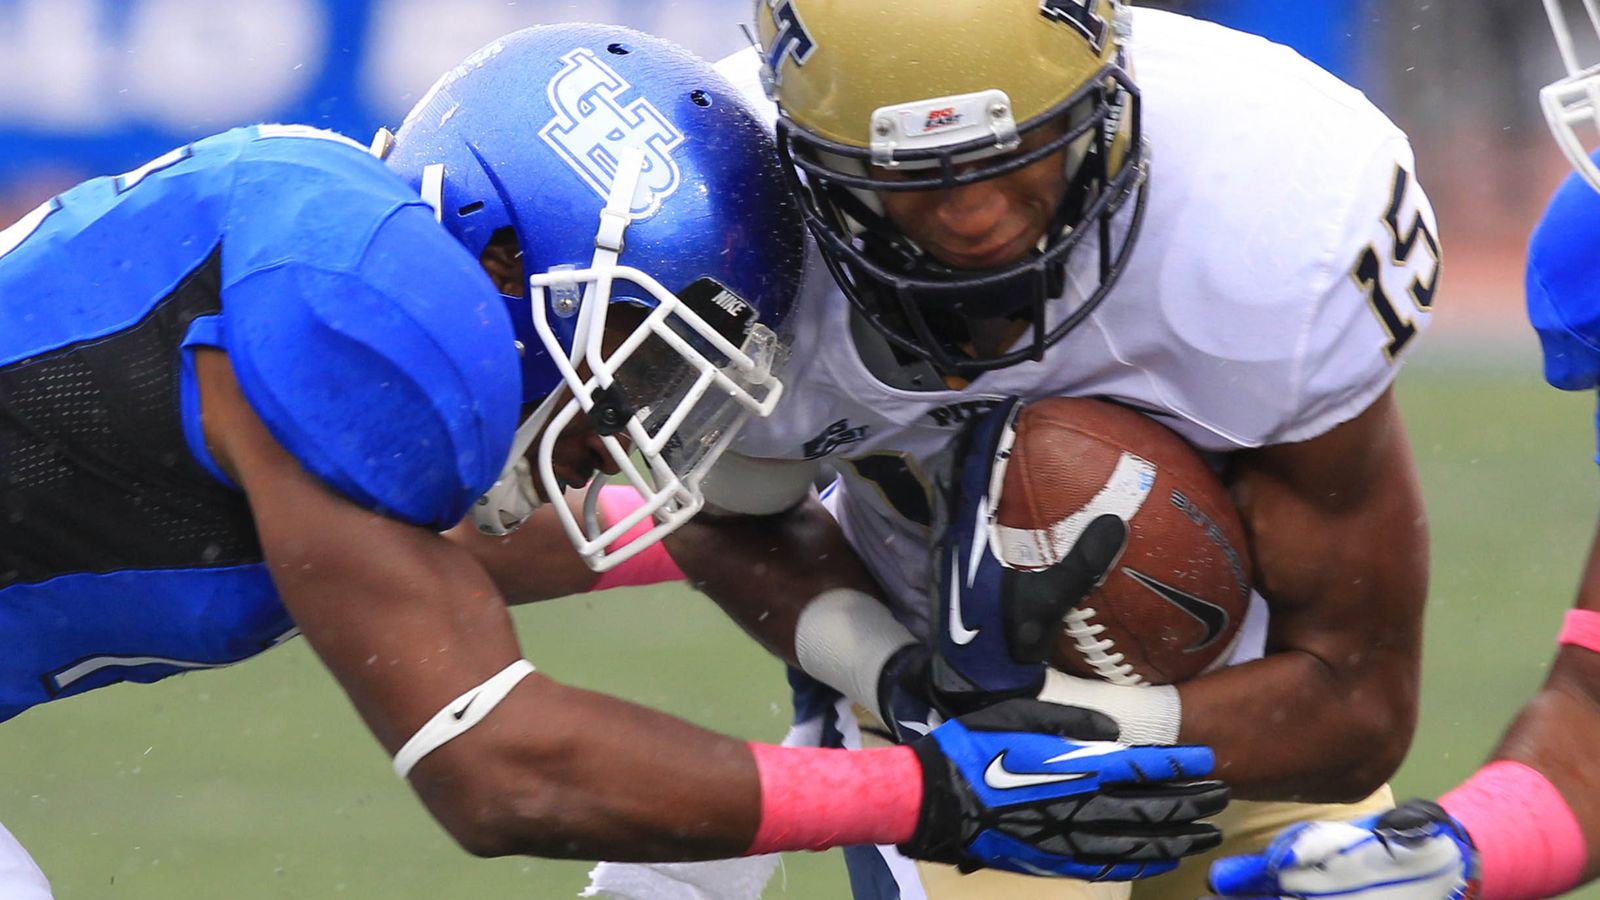 2013 Buffalo football's 10 things to know: Extensions and experience